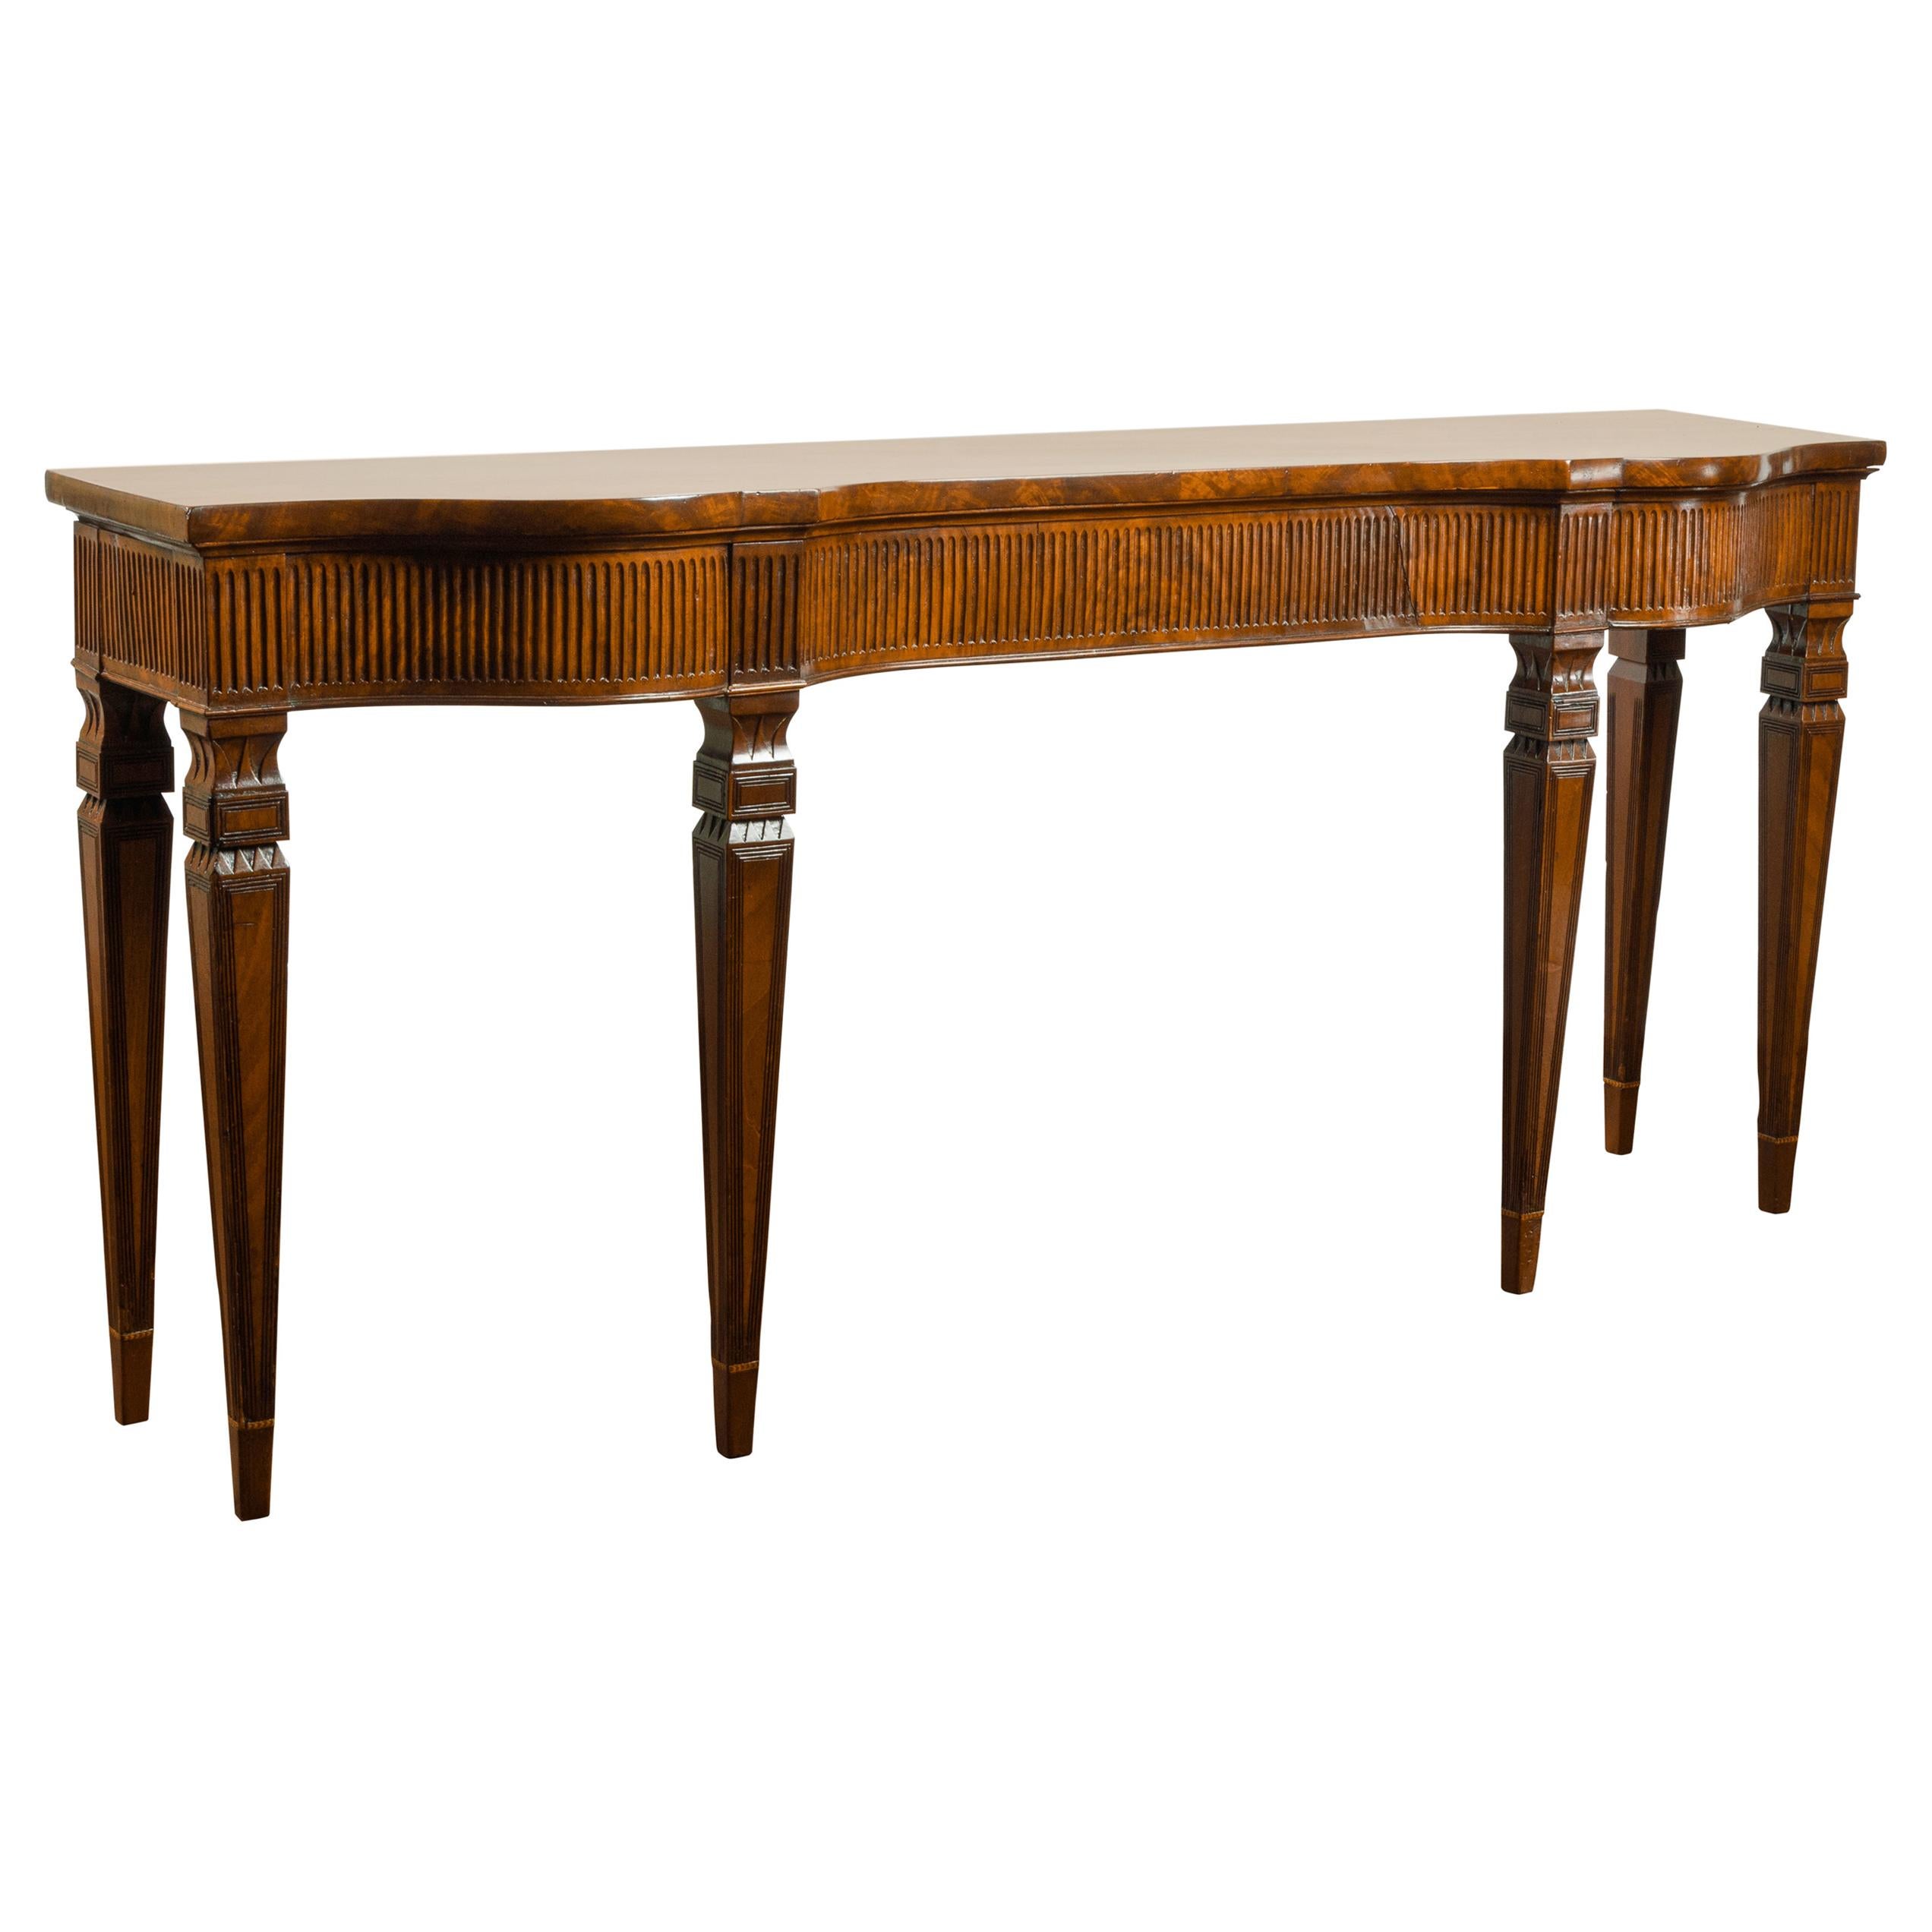 English 1850s Mahogany Console Table with Fluted Apron and Tapered Legs